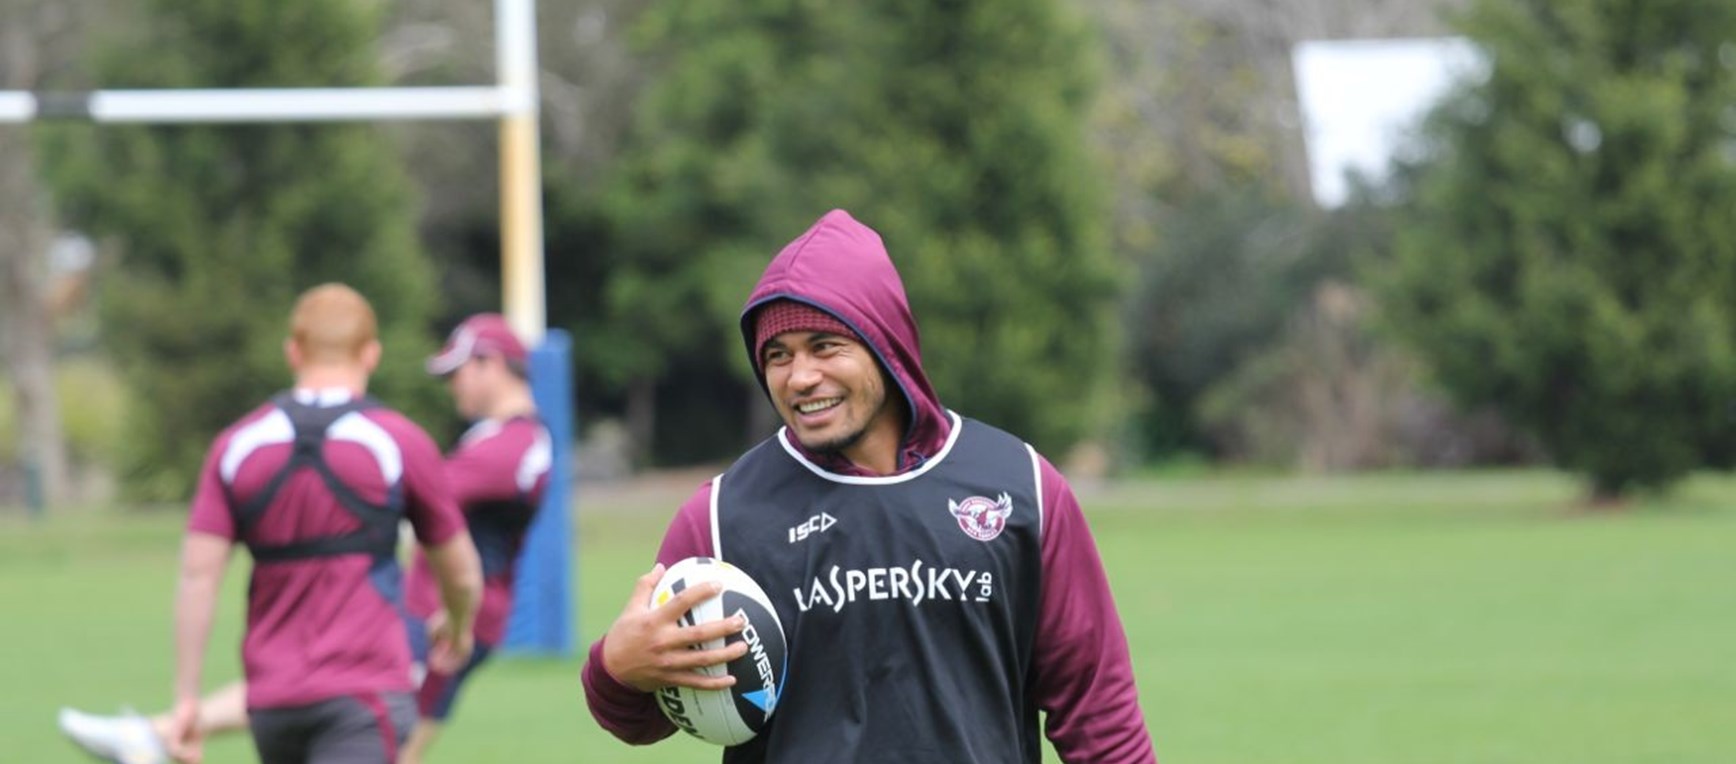 PHOTOS | Finals Week Two: Training 